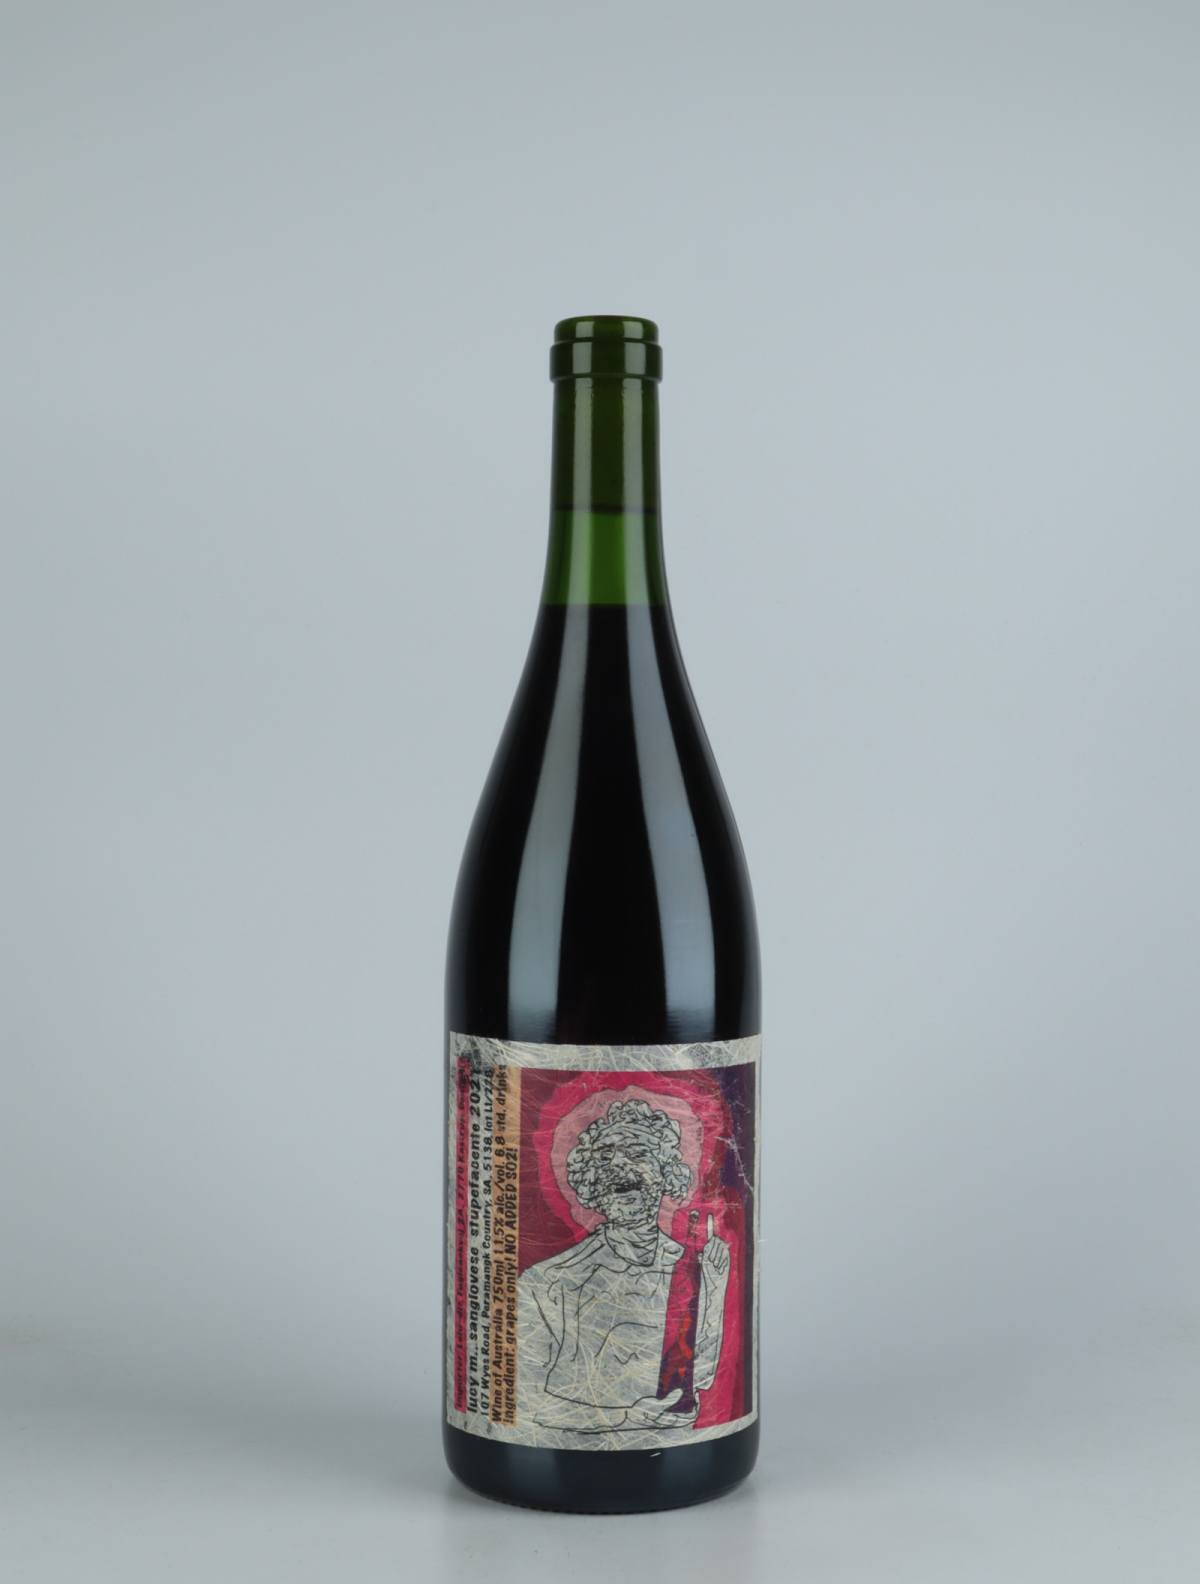 A bottle 2021 Sangiovese Stupefacente Red wine from Lucy Margaux, Adelaide Hills in 